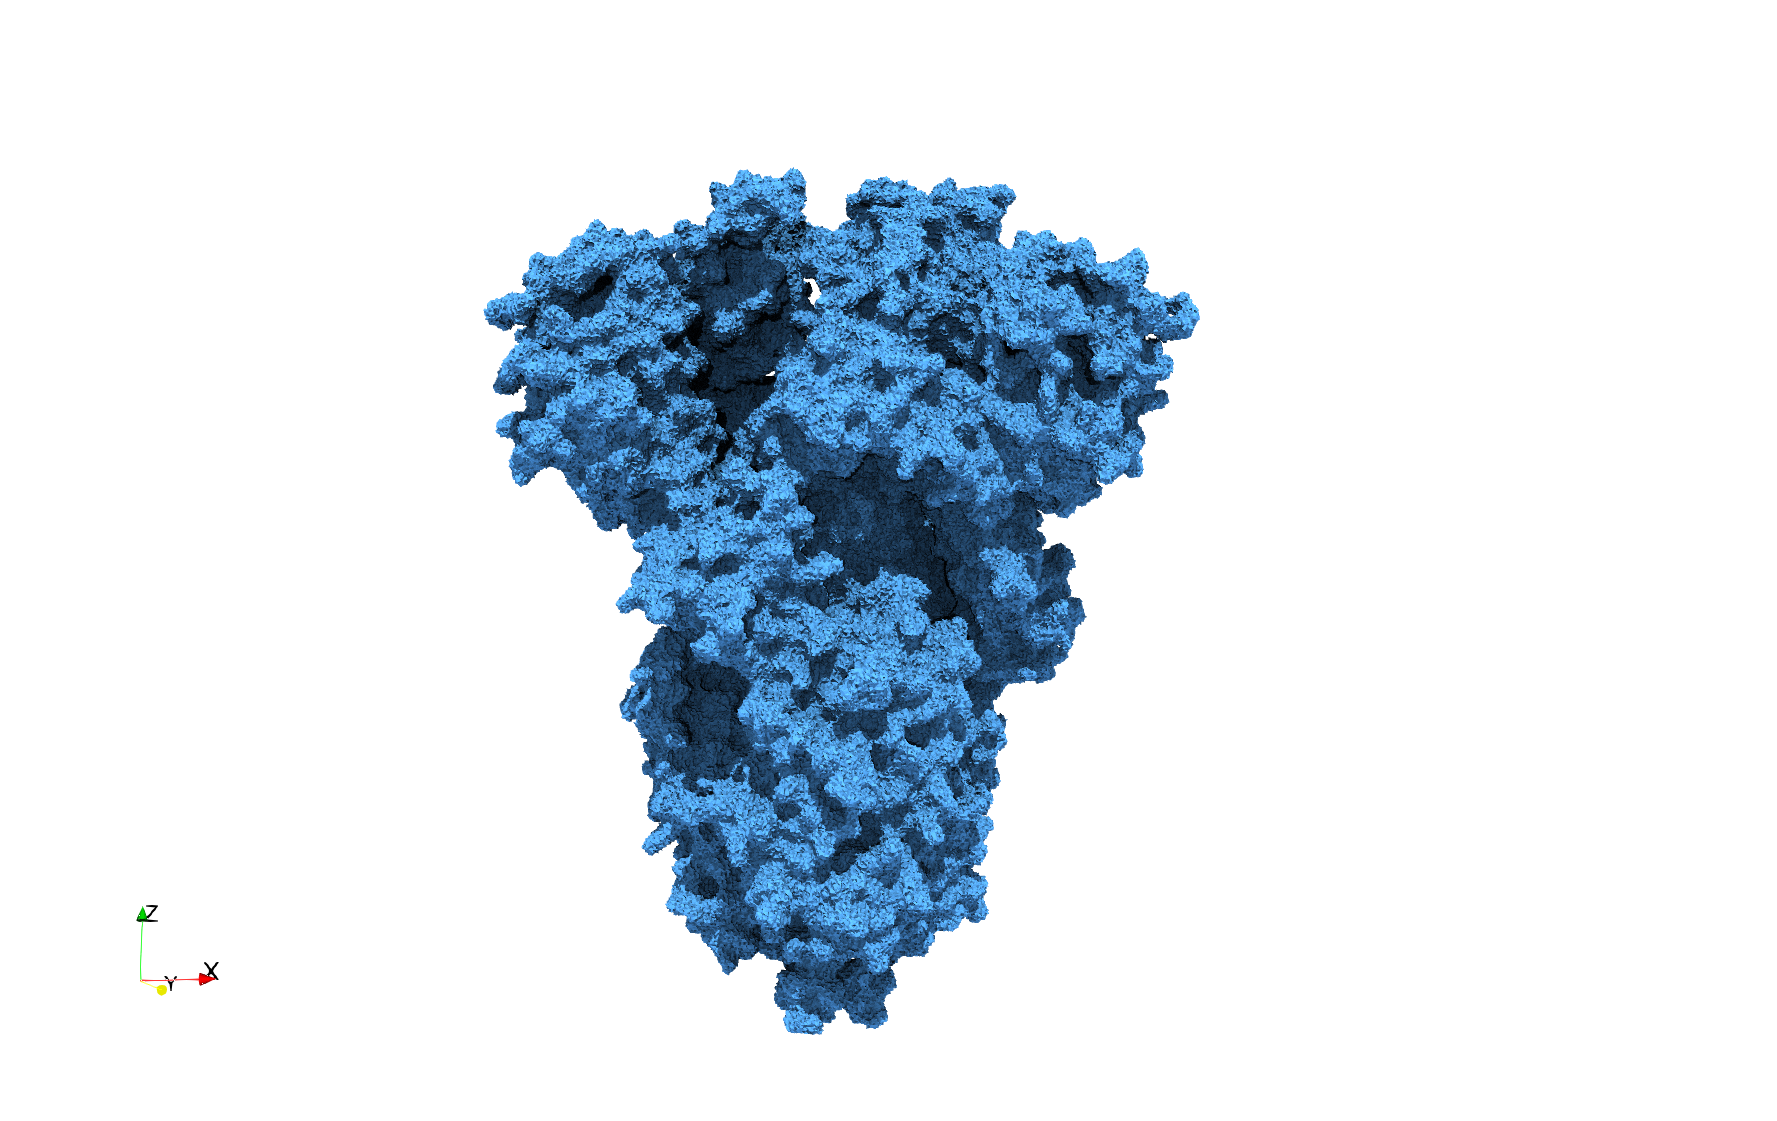 COVID-19-Spike-Glycoprotein-6vsb,d=0.4,graded.png